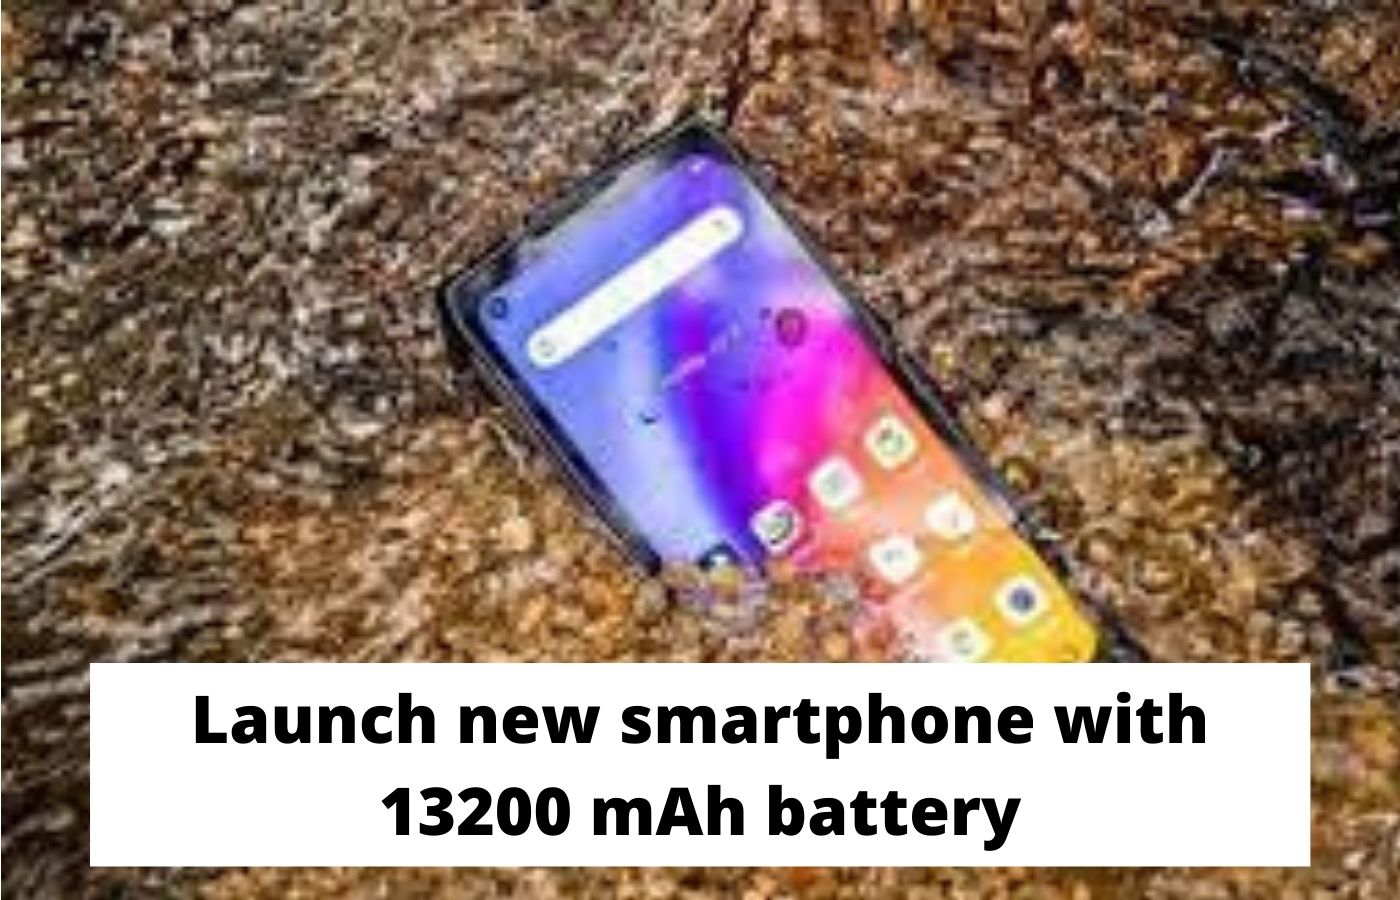 Launch new smartphone with 13200 mAh battery